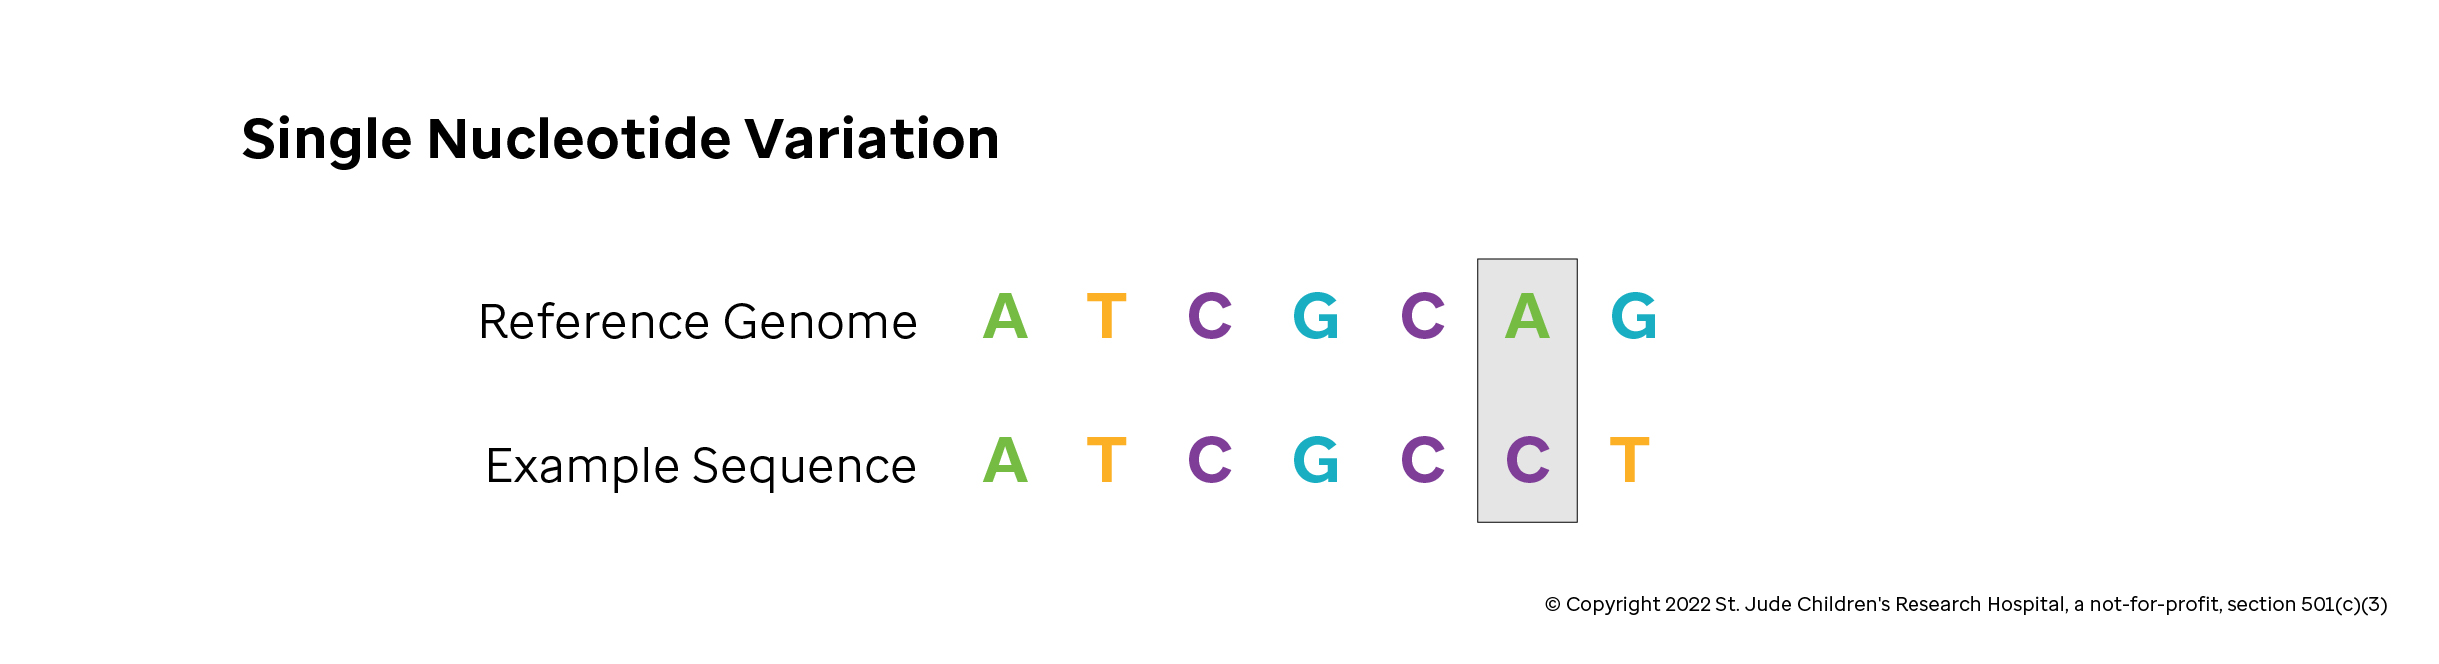 An example single nucleotide variation where an &#39;A&#39; is substituted in for a &#39;C&#39;